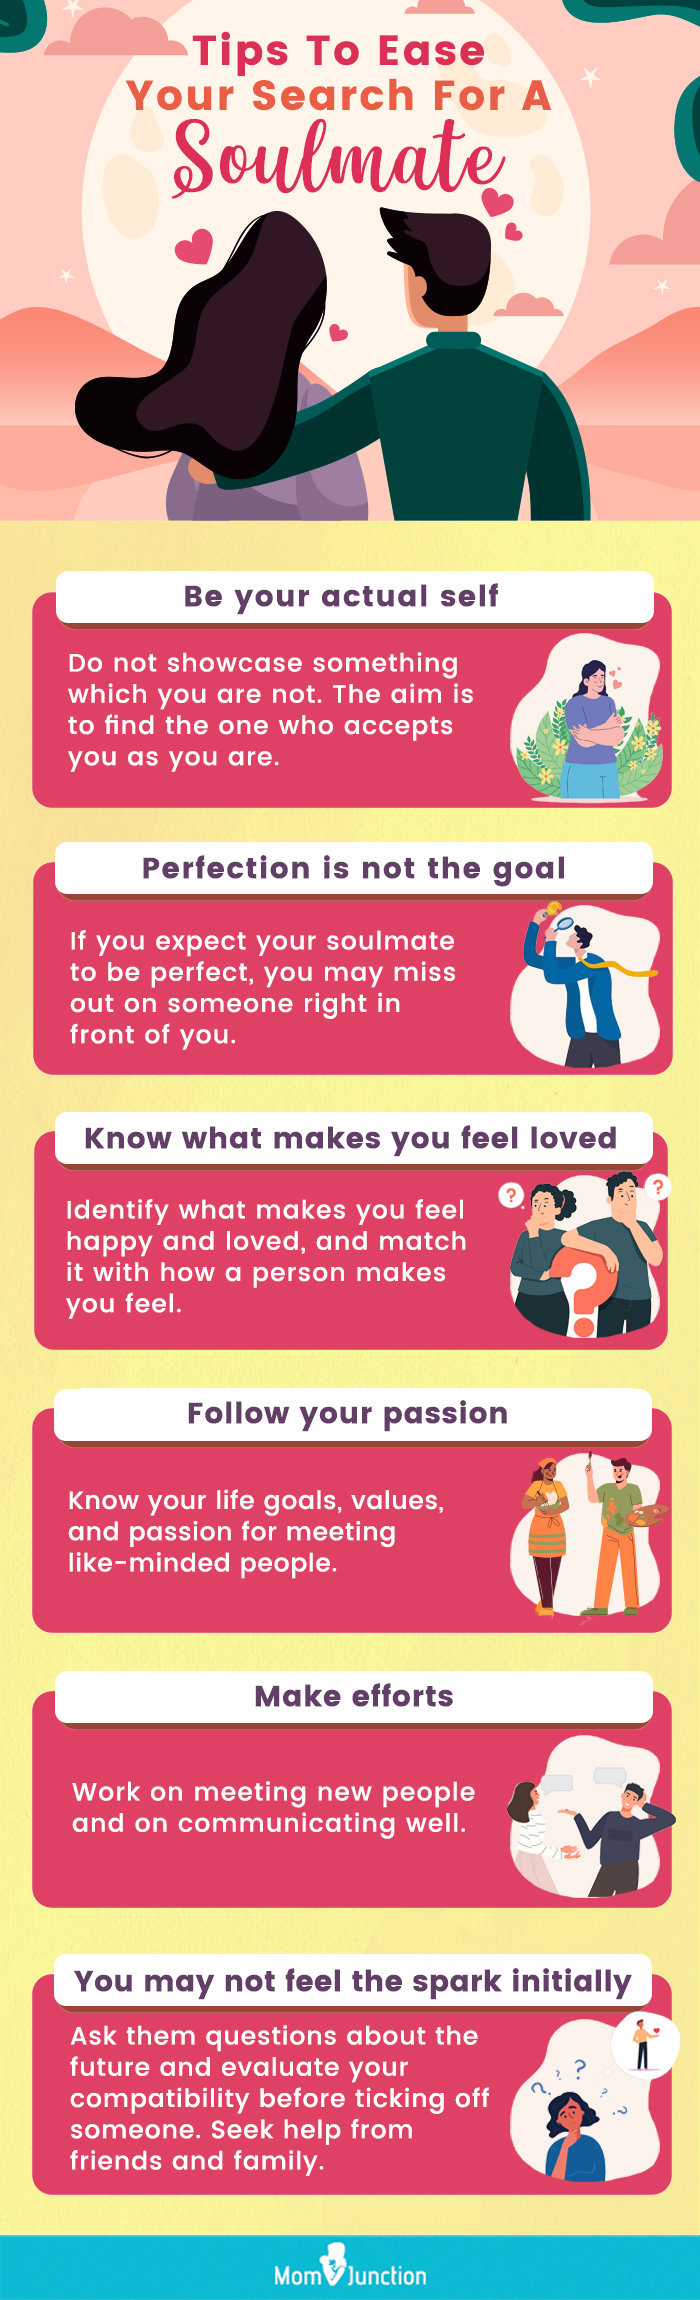 searching for a soulmate [infographic]